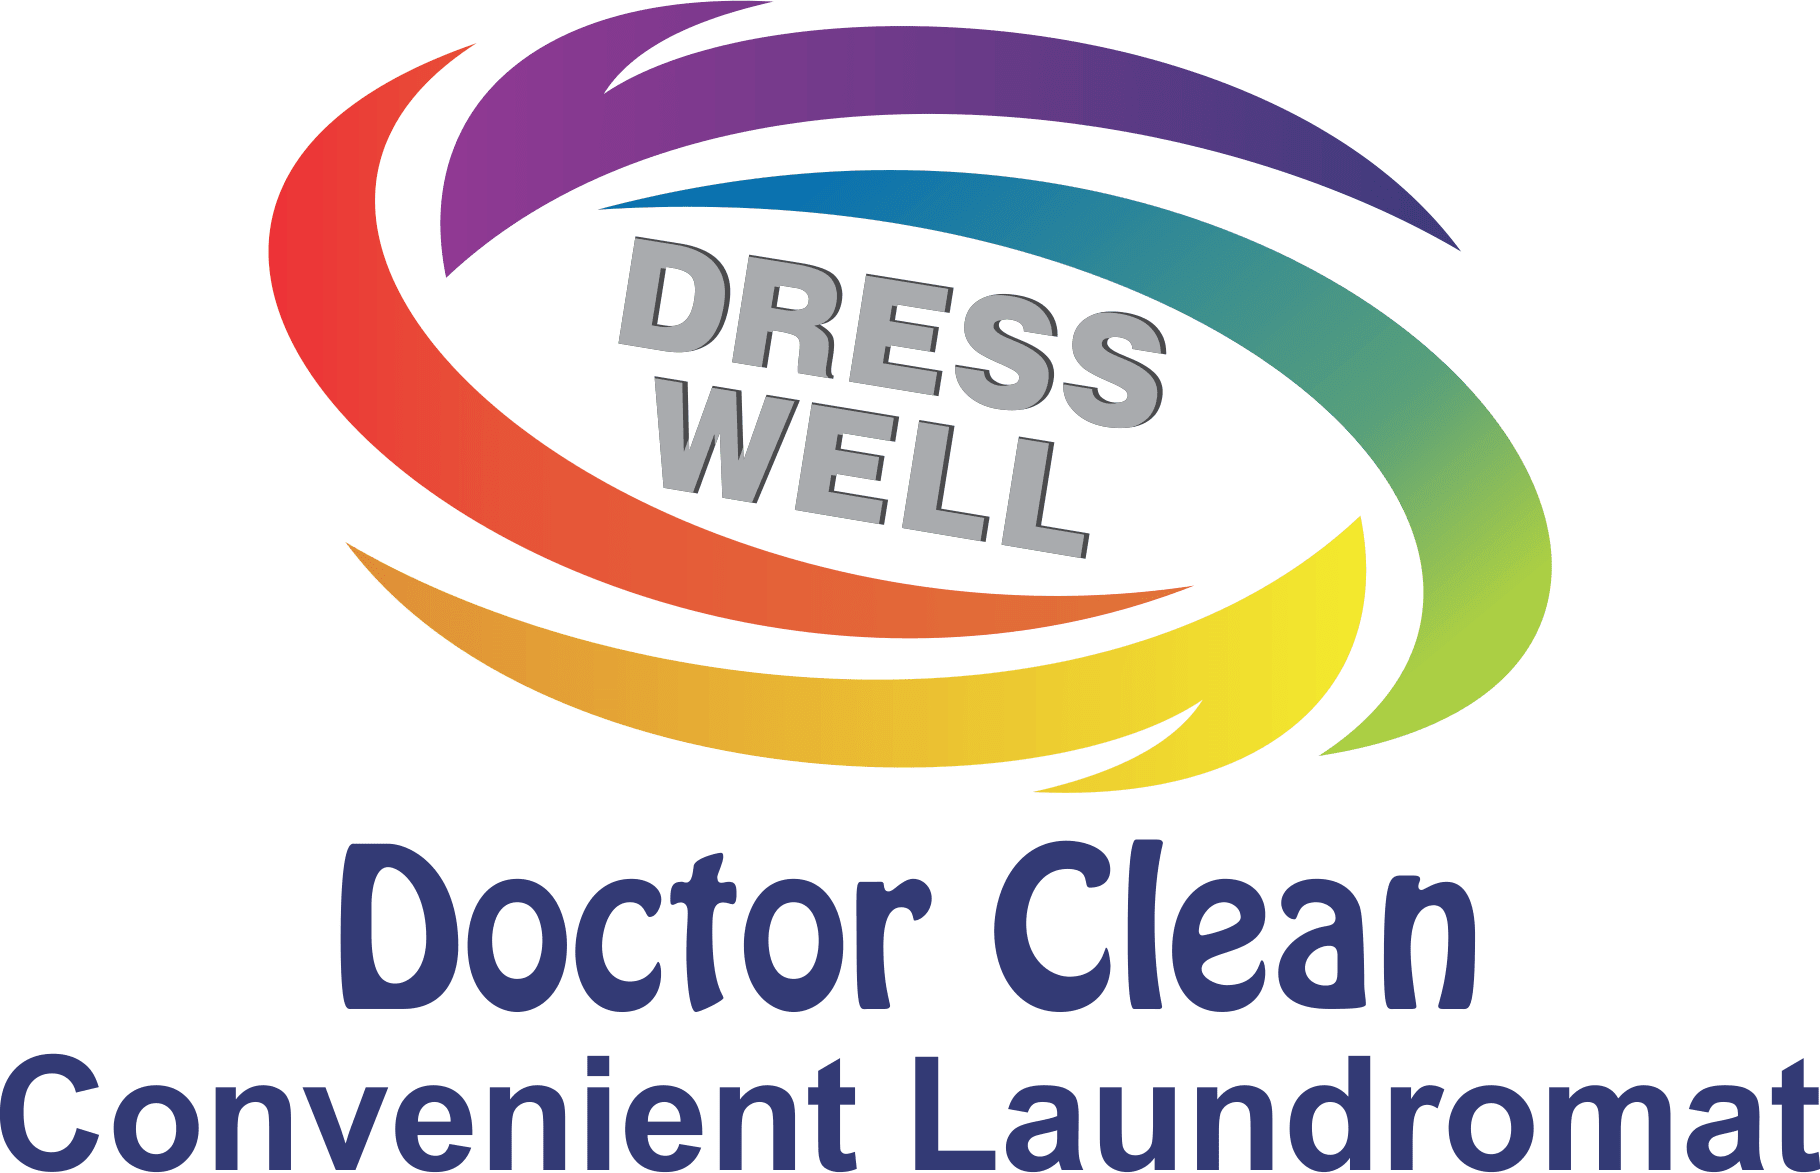 Doctor Clean Laundromats & Dryers